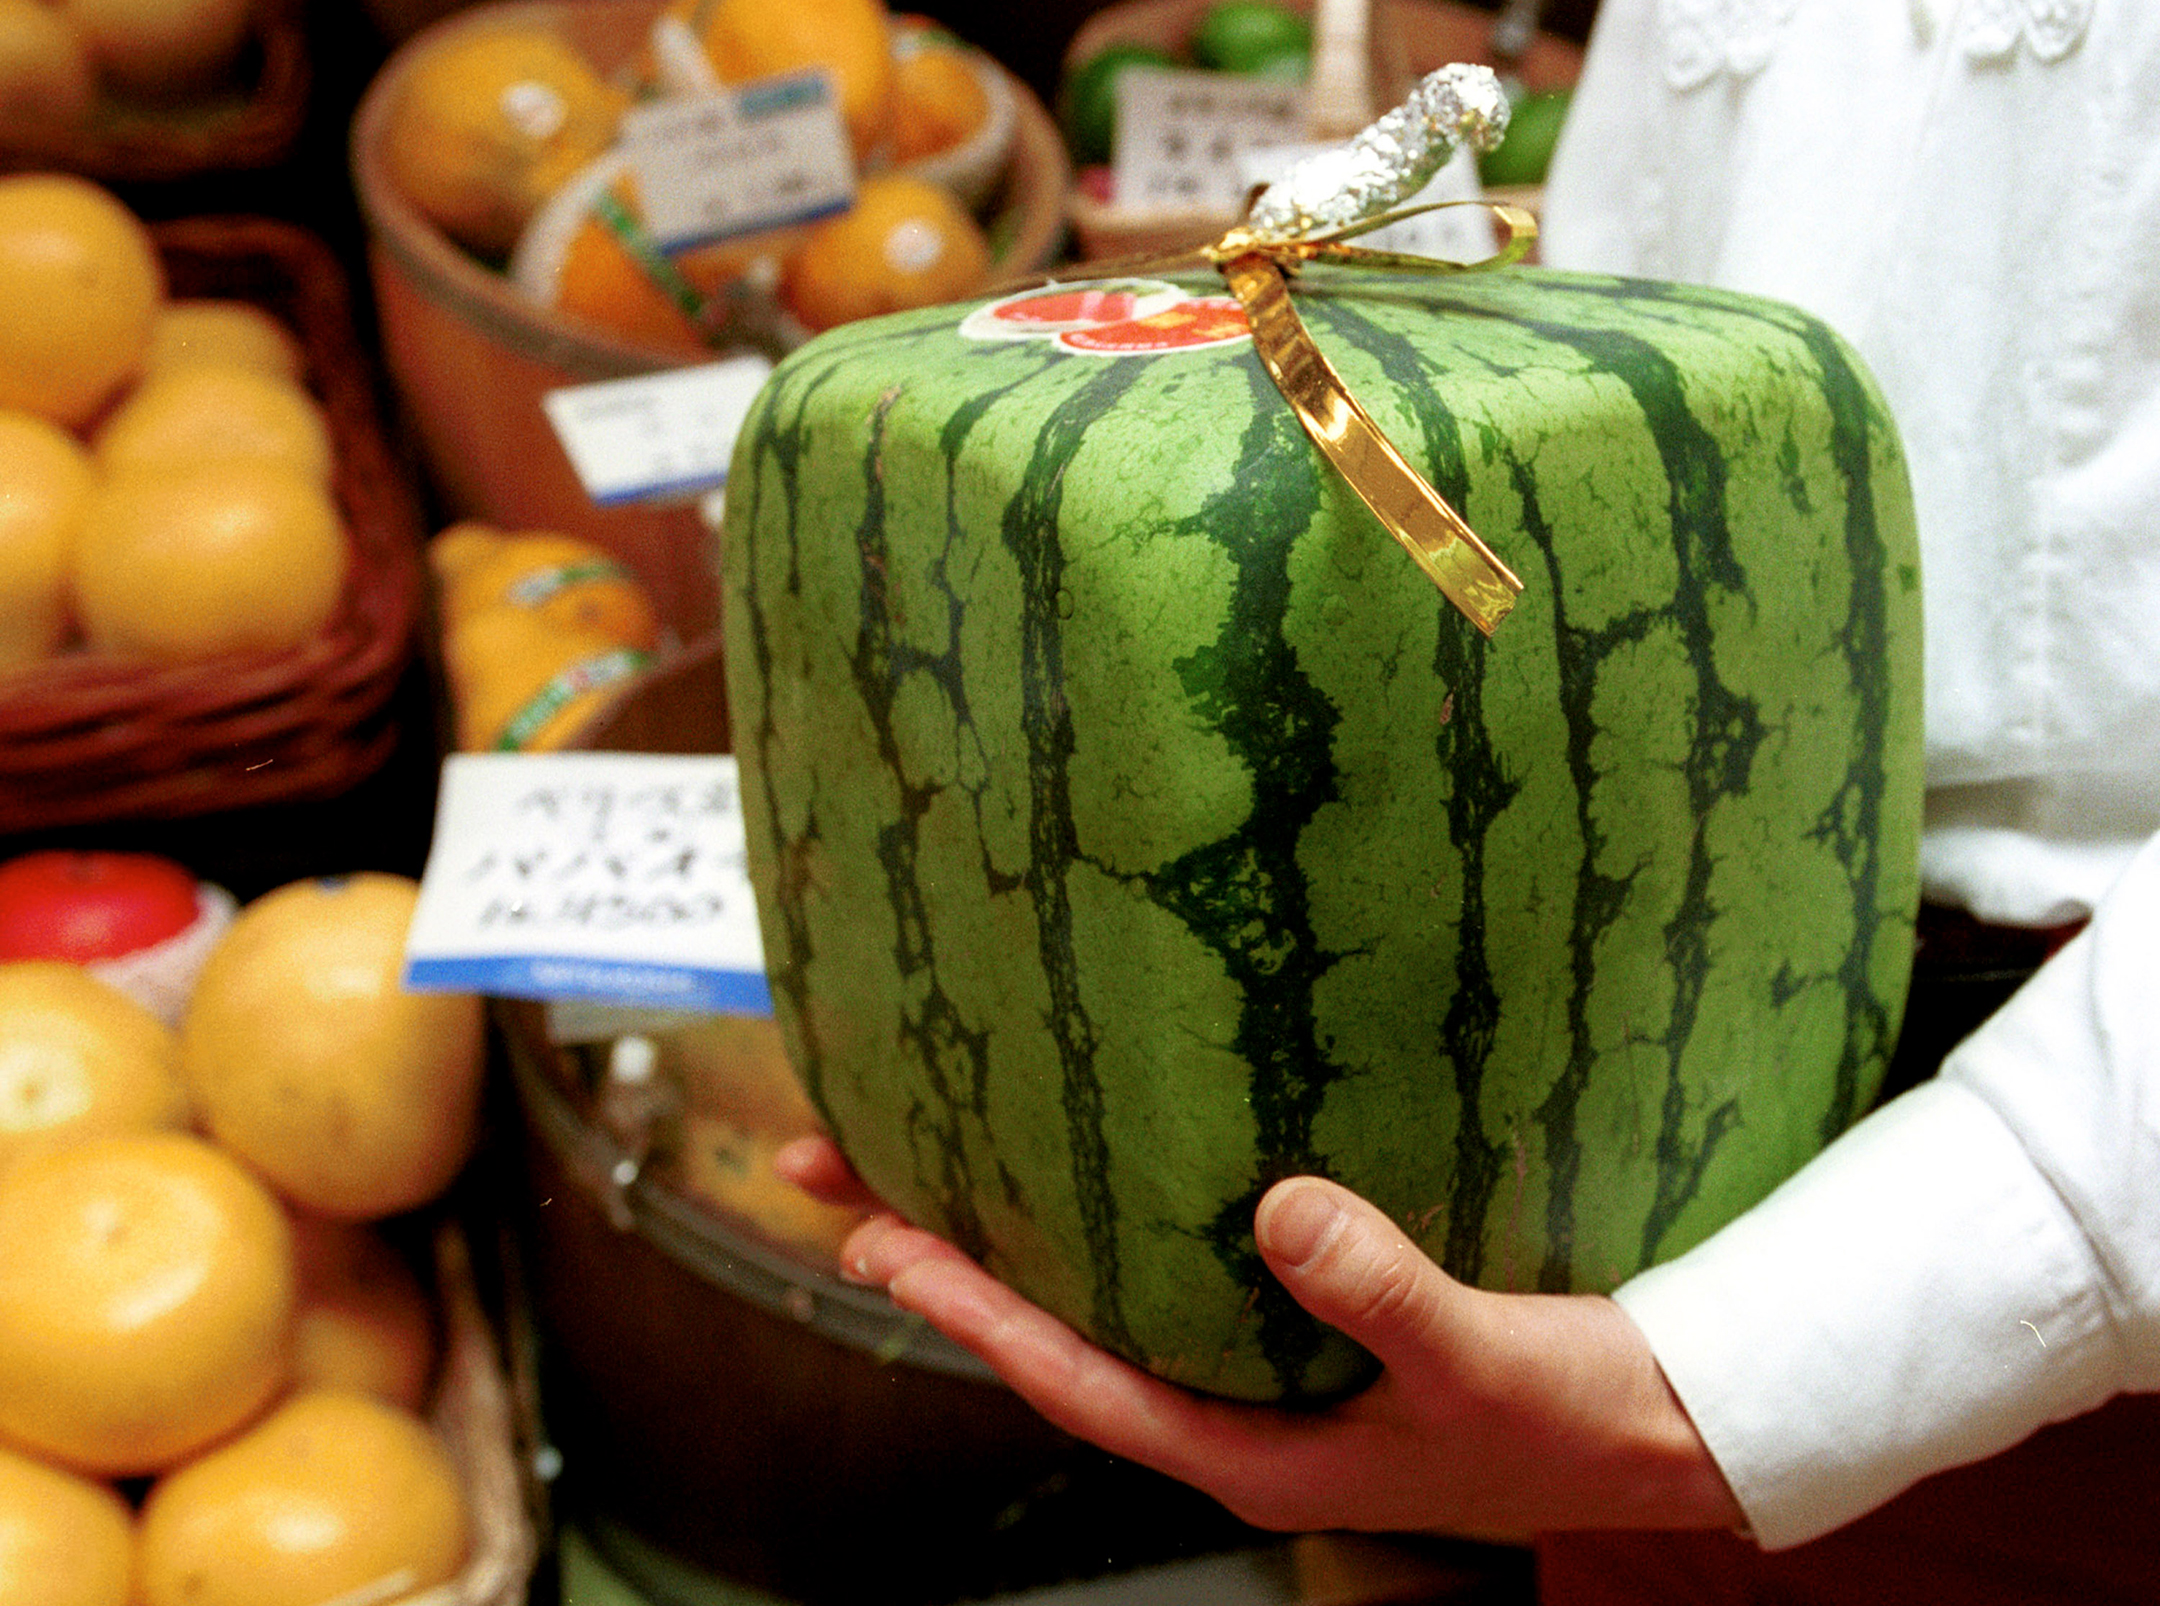 Woman holding a square watermelon with a bow tied around it